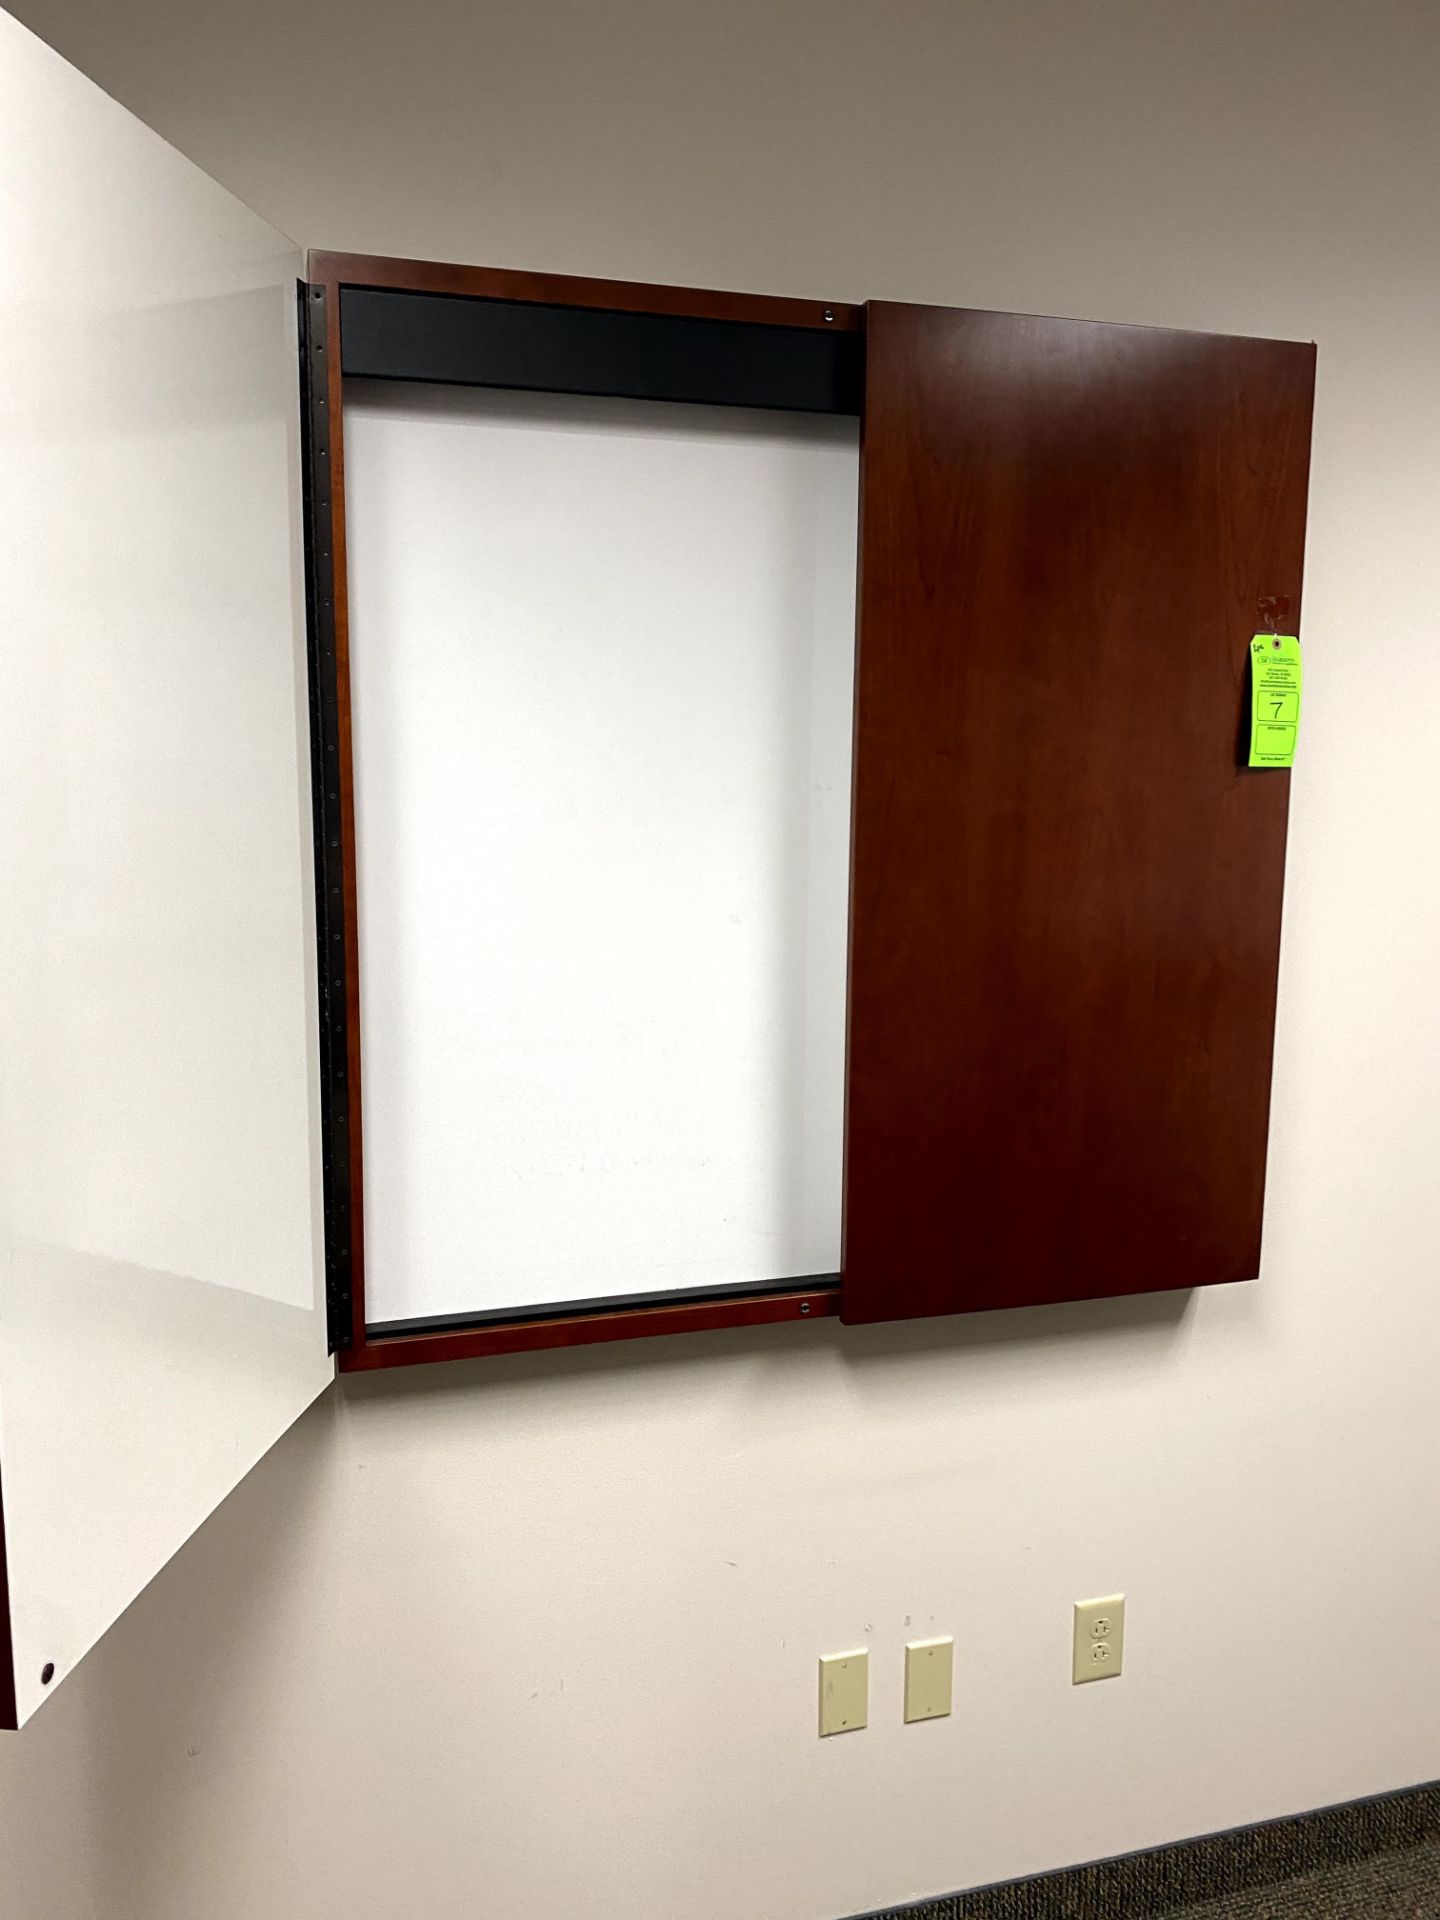 (2) CHERRY WOOD WALL MOUNTED DRY ERASE BOARD(S) - 1 WITH PULL DOWN SCREEN -- (7625 OMNITECH PLACE